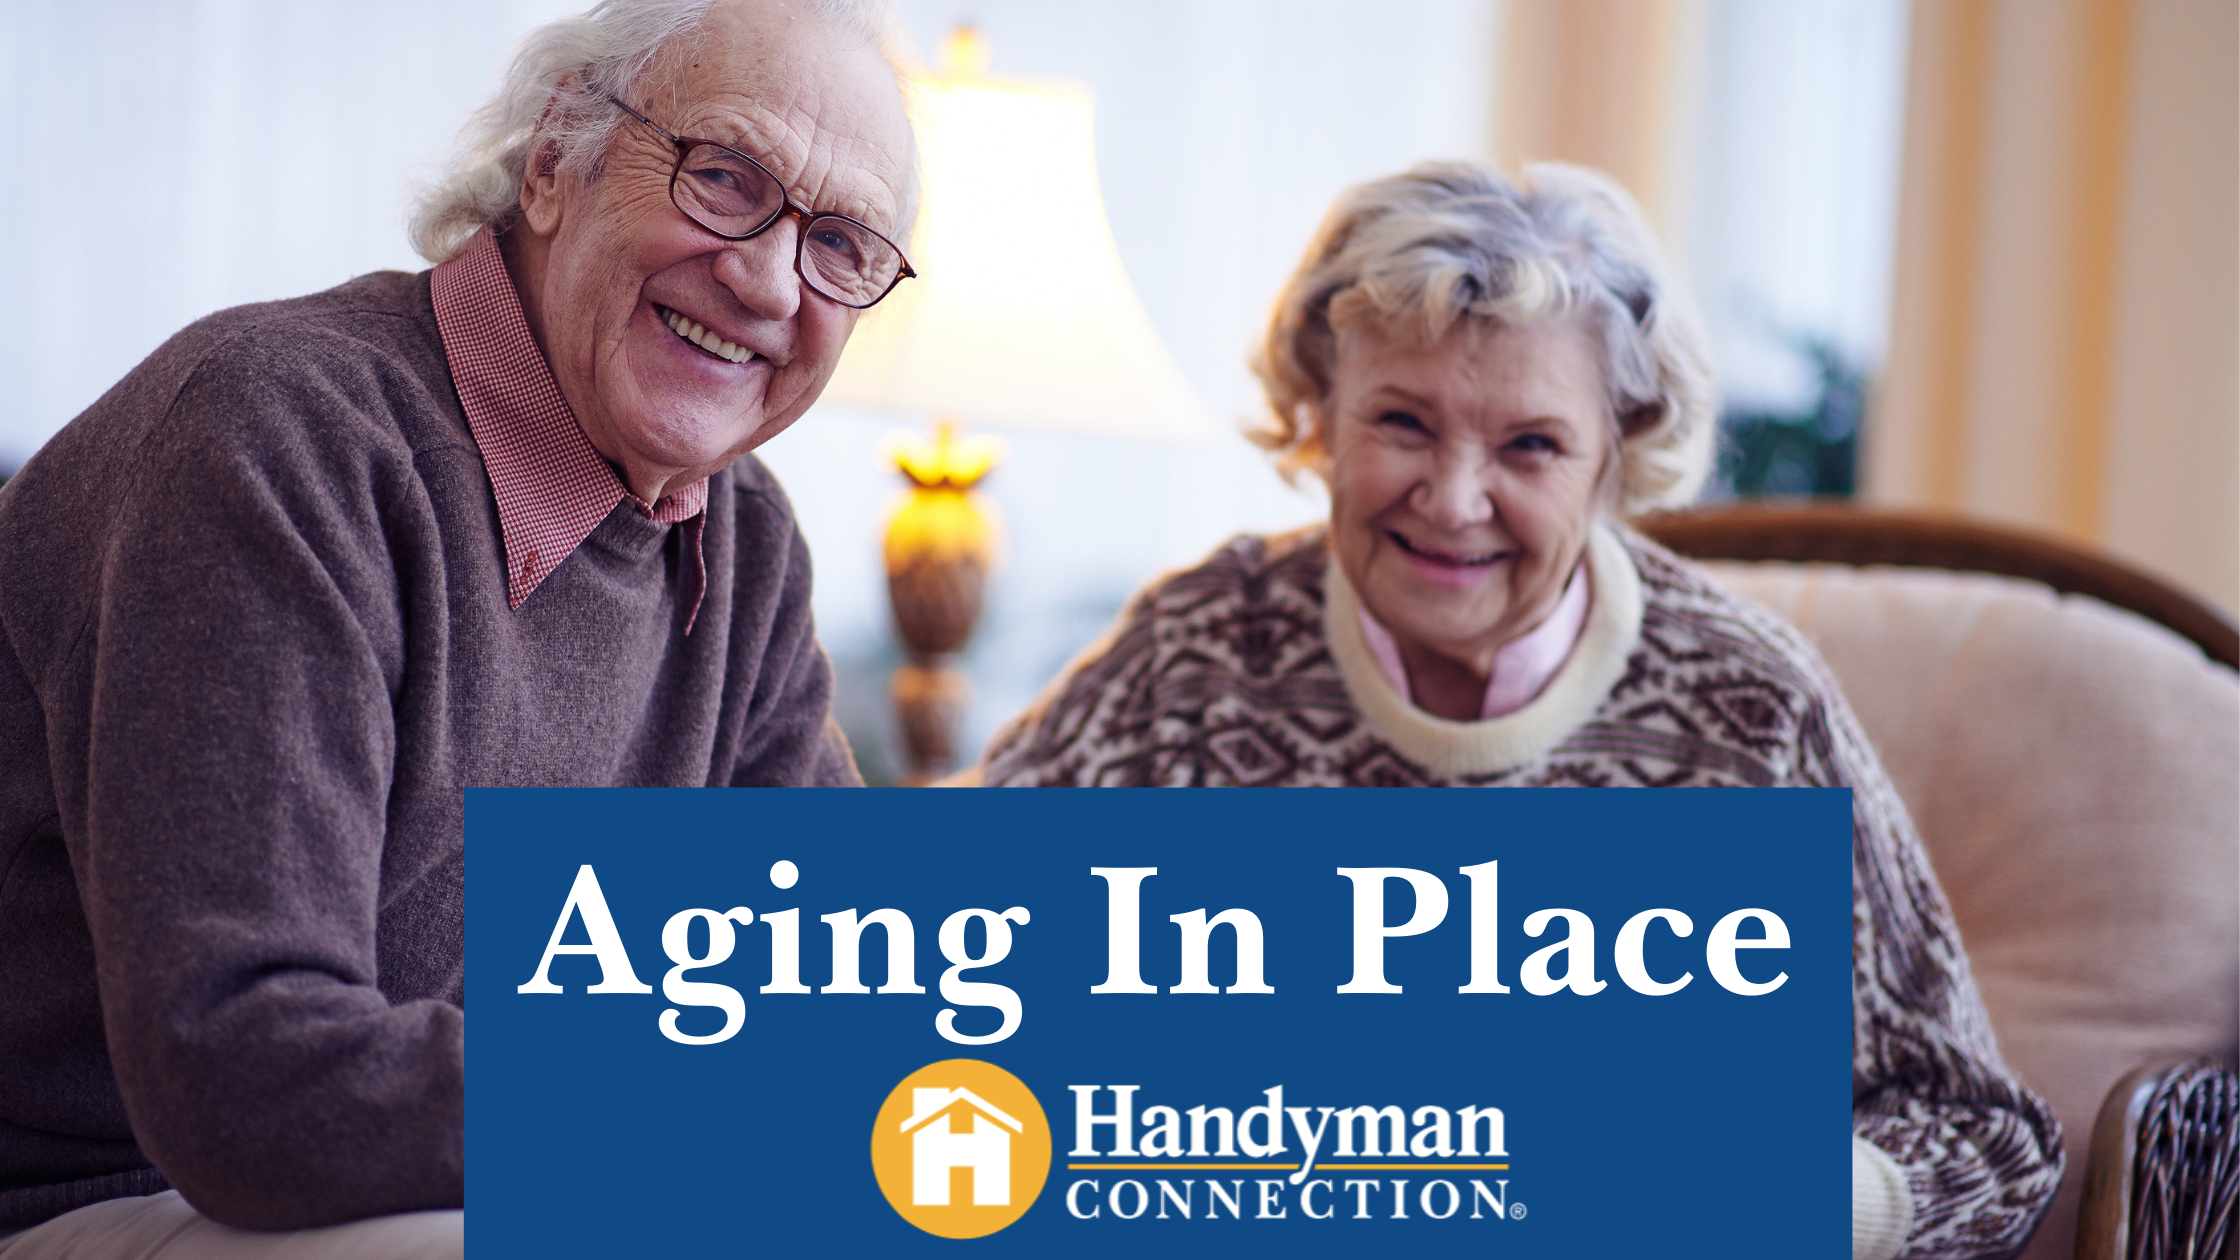 https://handymanconnection.com/wp-content/uploads/2021/05/Aging-In-Place.png